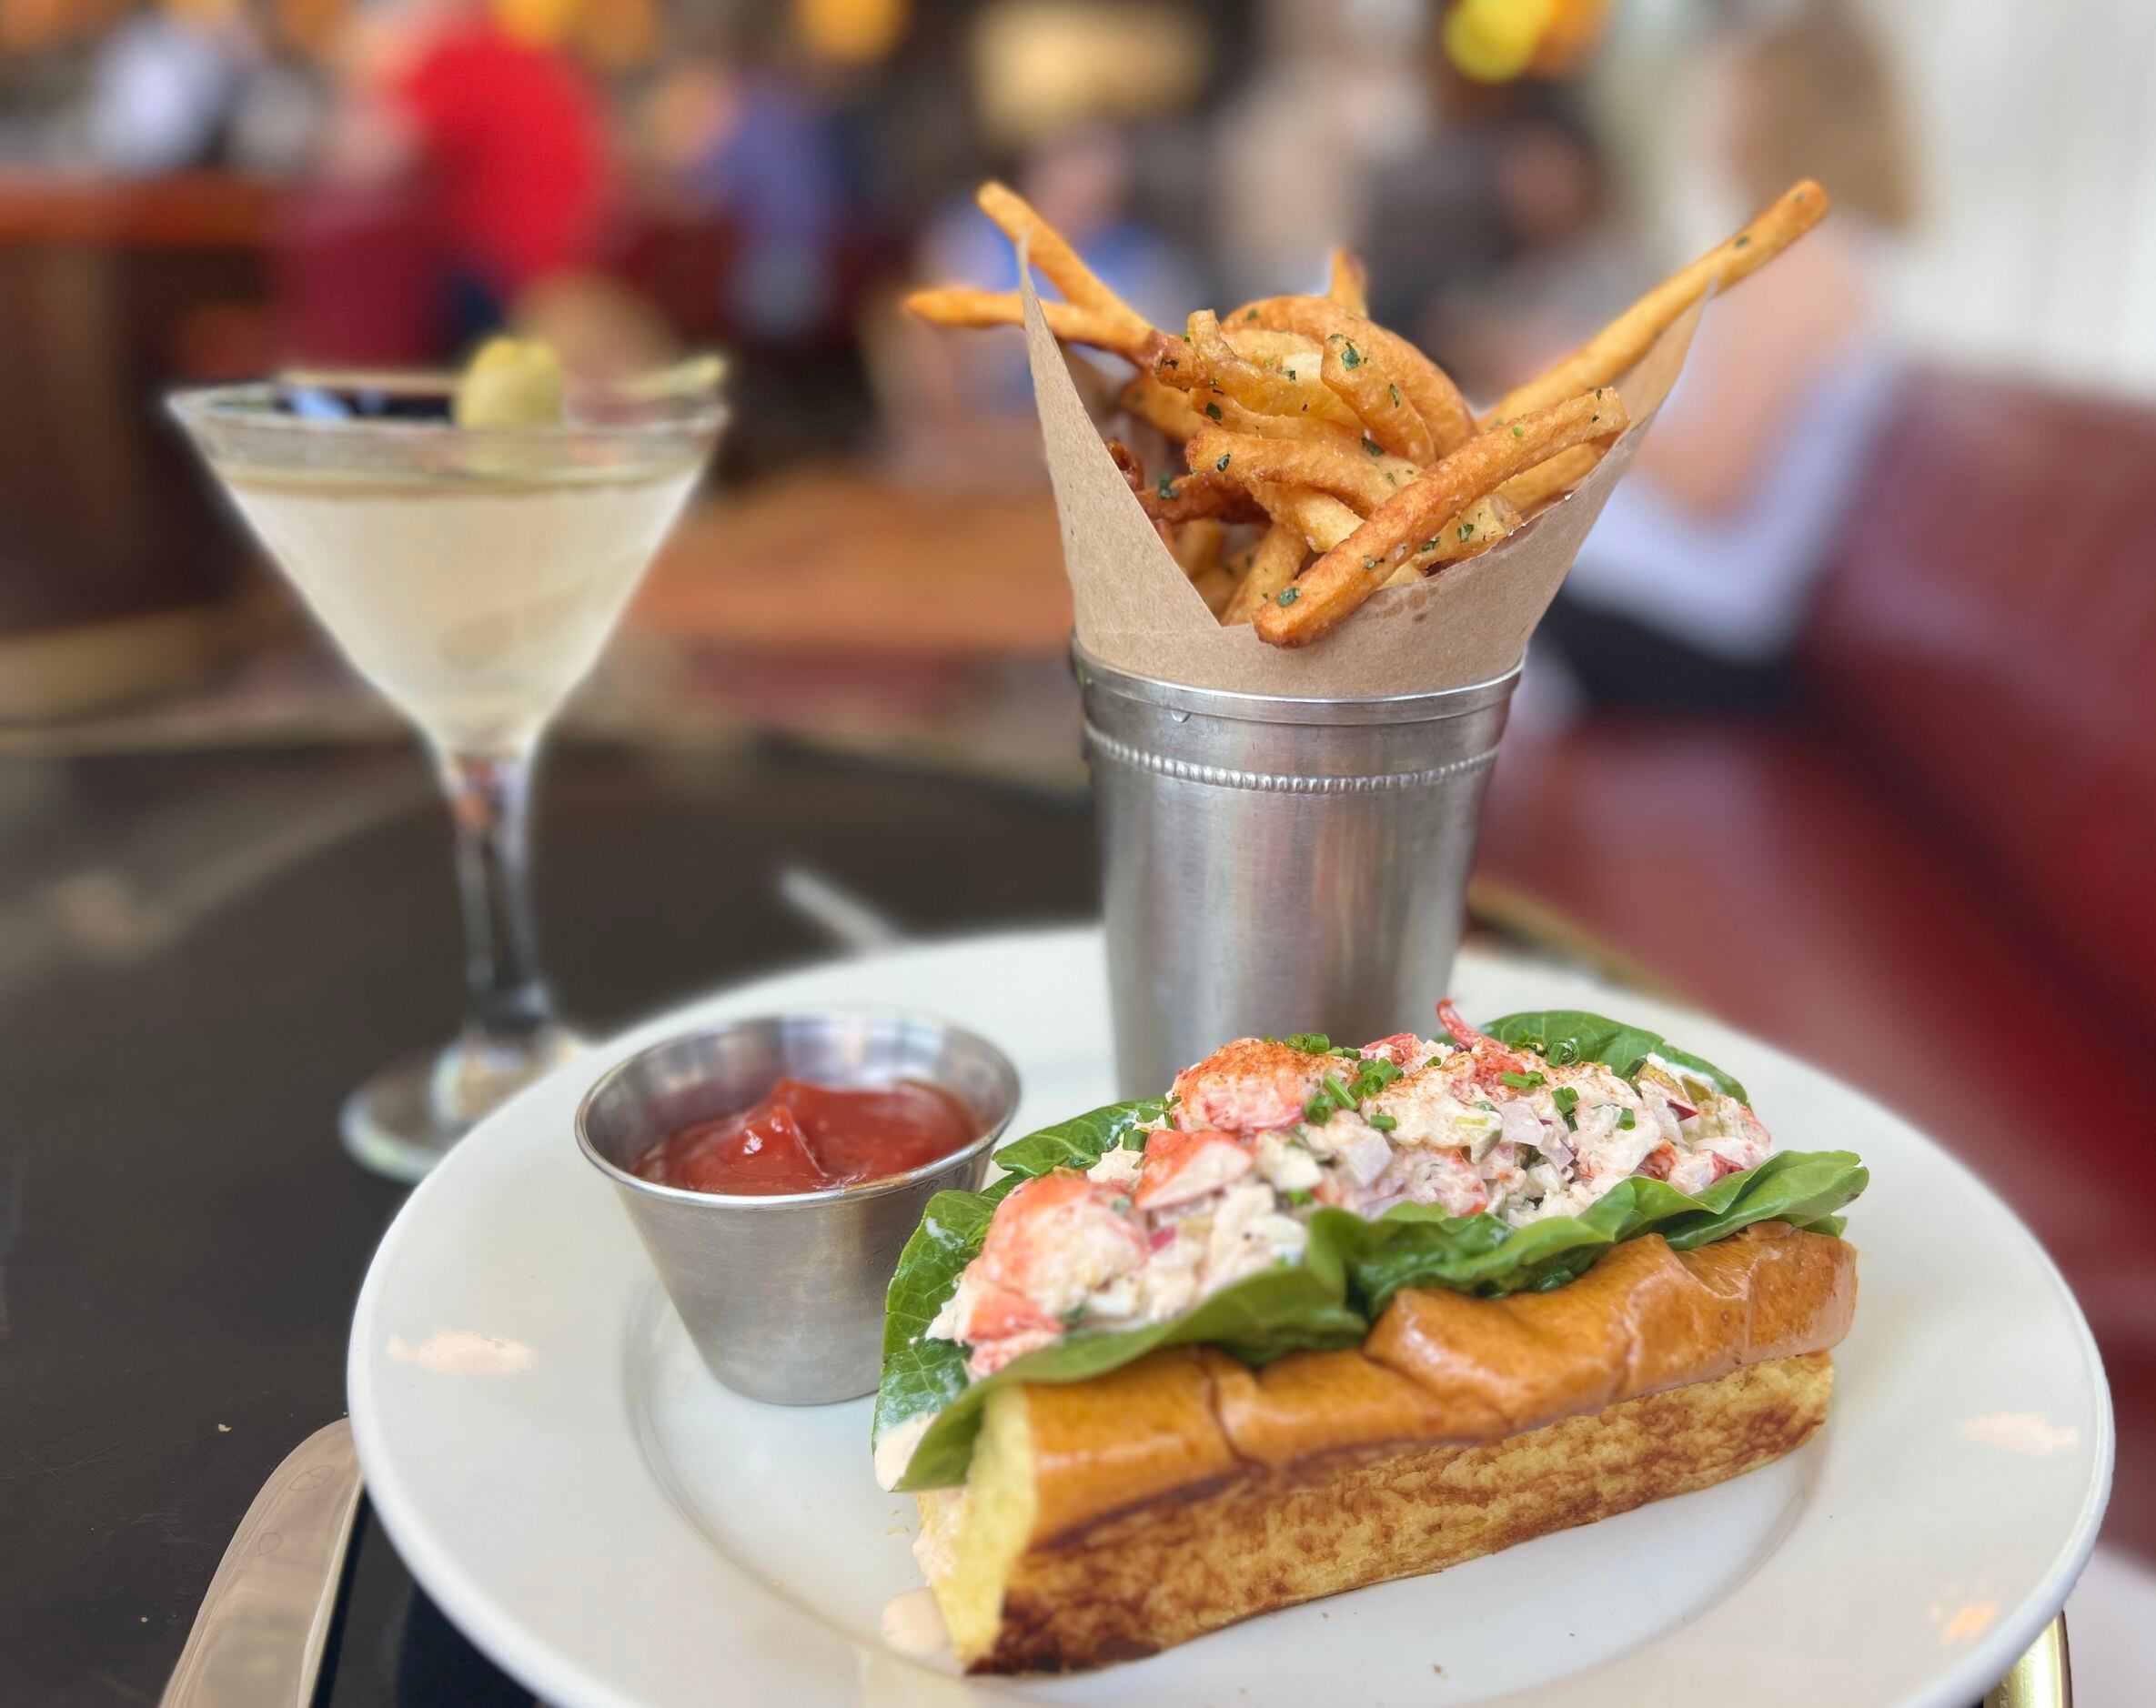 The mayo-based lobster roll at Walloon's in Fort Worth is a lavish lunch option.